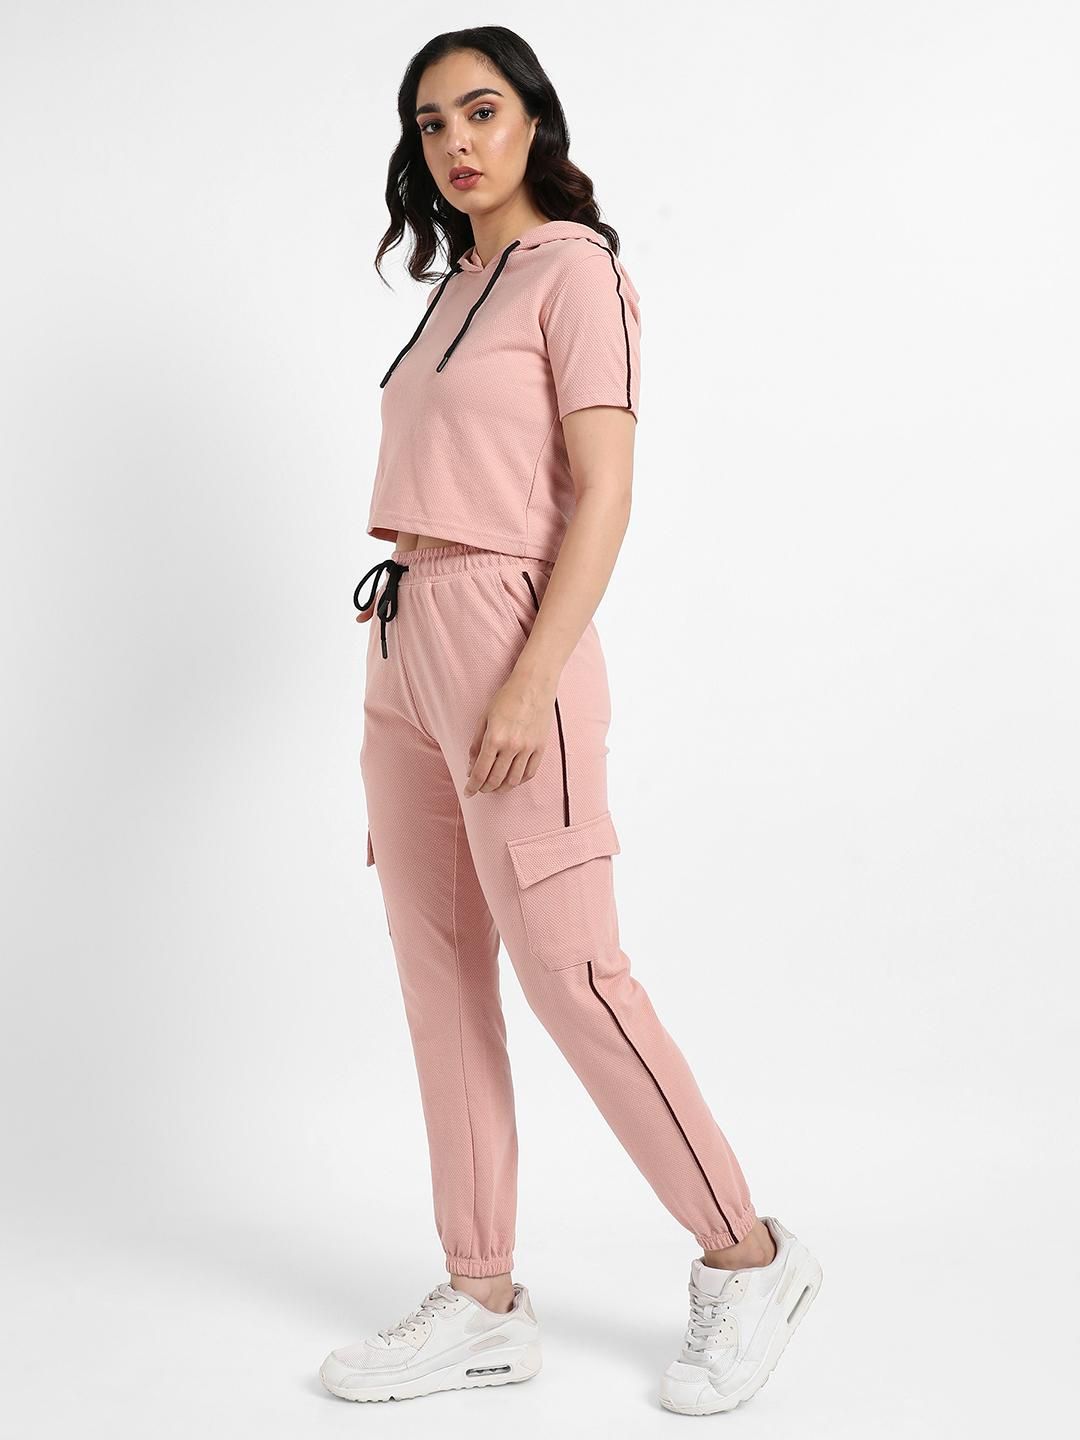 Campus Sutra Women's Hooded Co-Ord Set With Contrast Piping